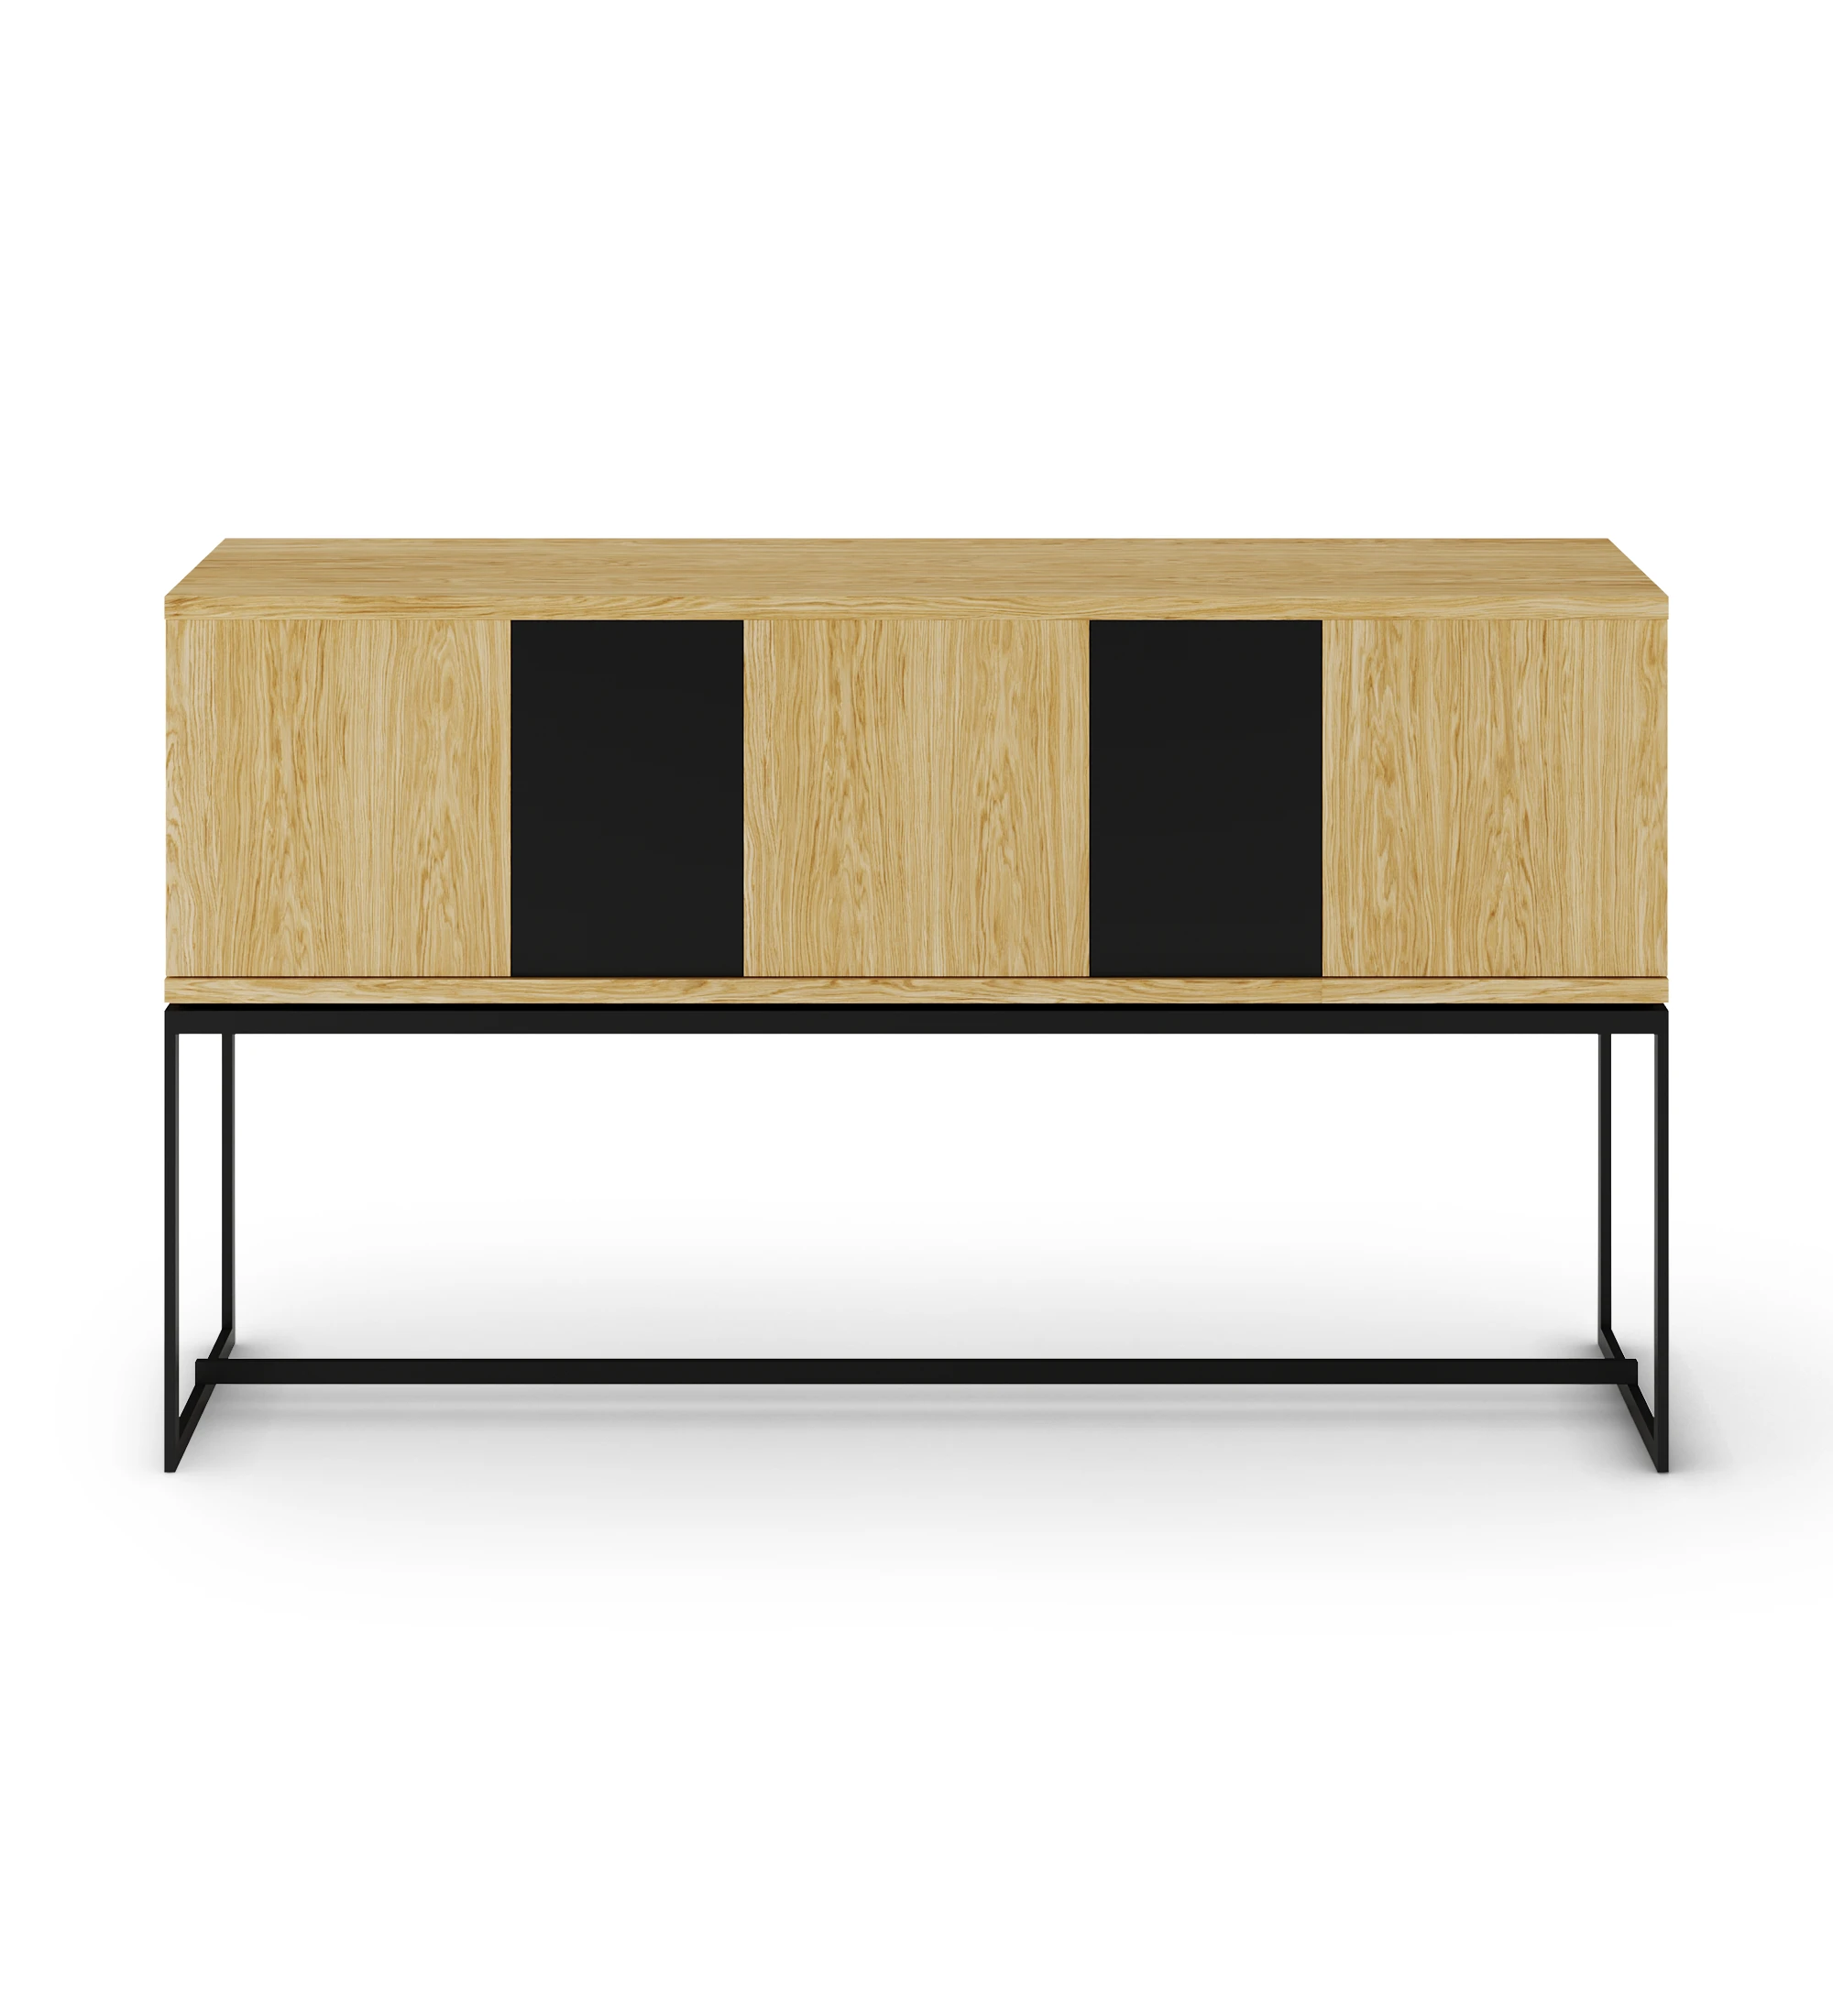 Sideboard with 3 large doors and structure in natural oak, 2 small doors in black lacquer, with black lacquered metal feet